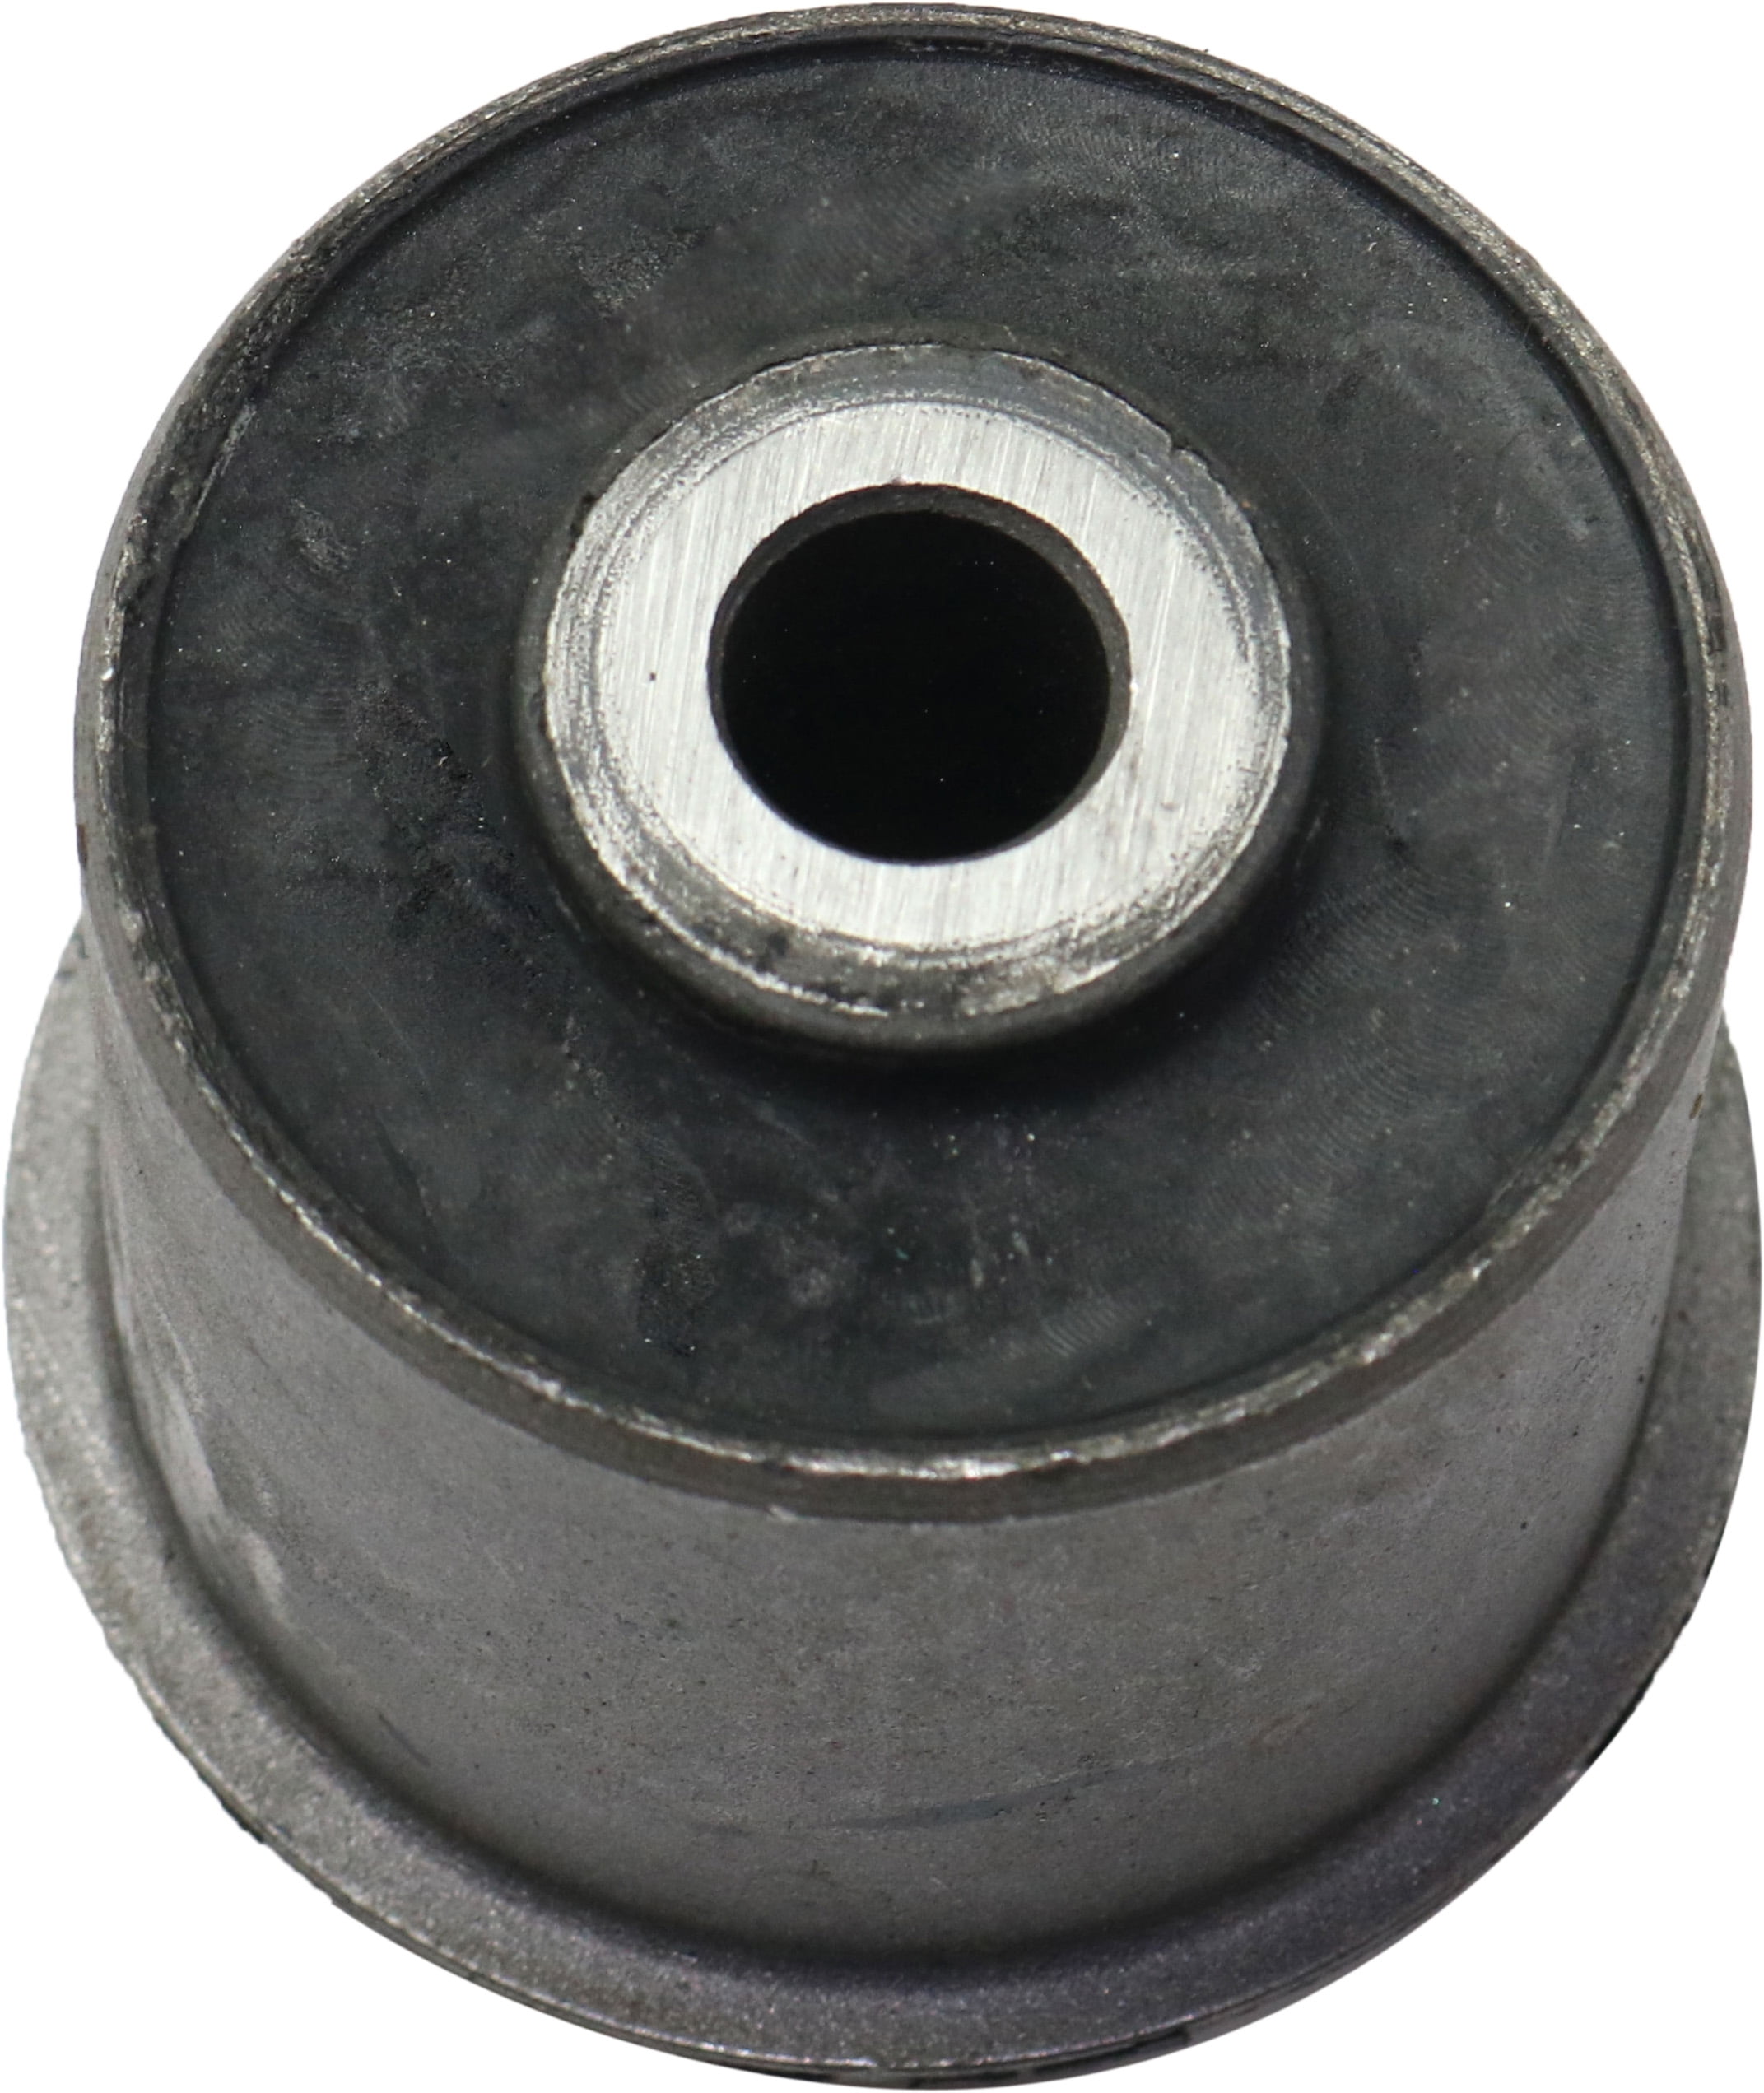 Control Arm Bushing Compatible with 2002-2009 Chevrolet Trailblazer GMC  Envoy 6Cyl 8Cyl 4.2L 5.3L 6.0L Front, Left Driver or Right Passenger Side, 